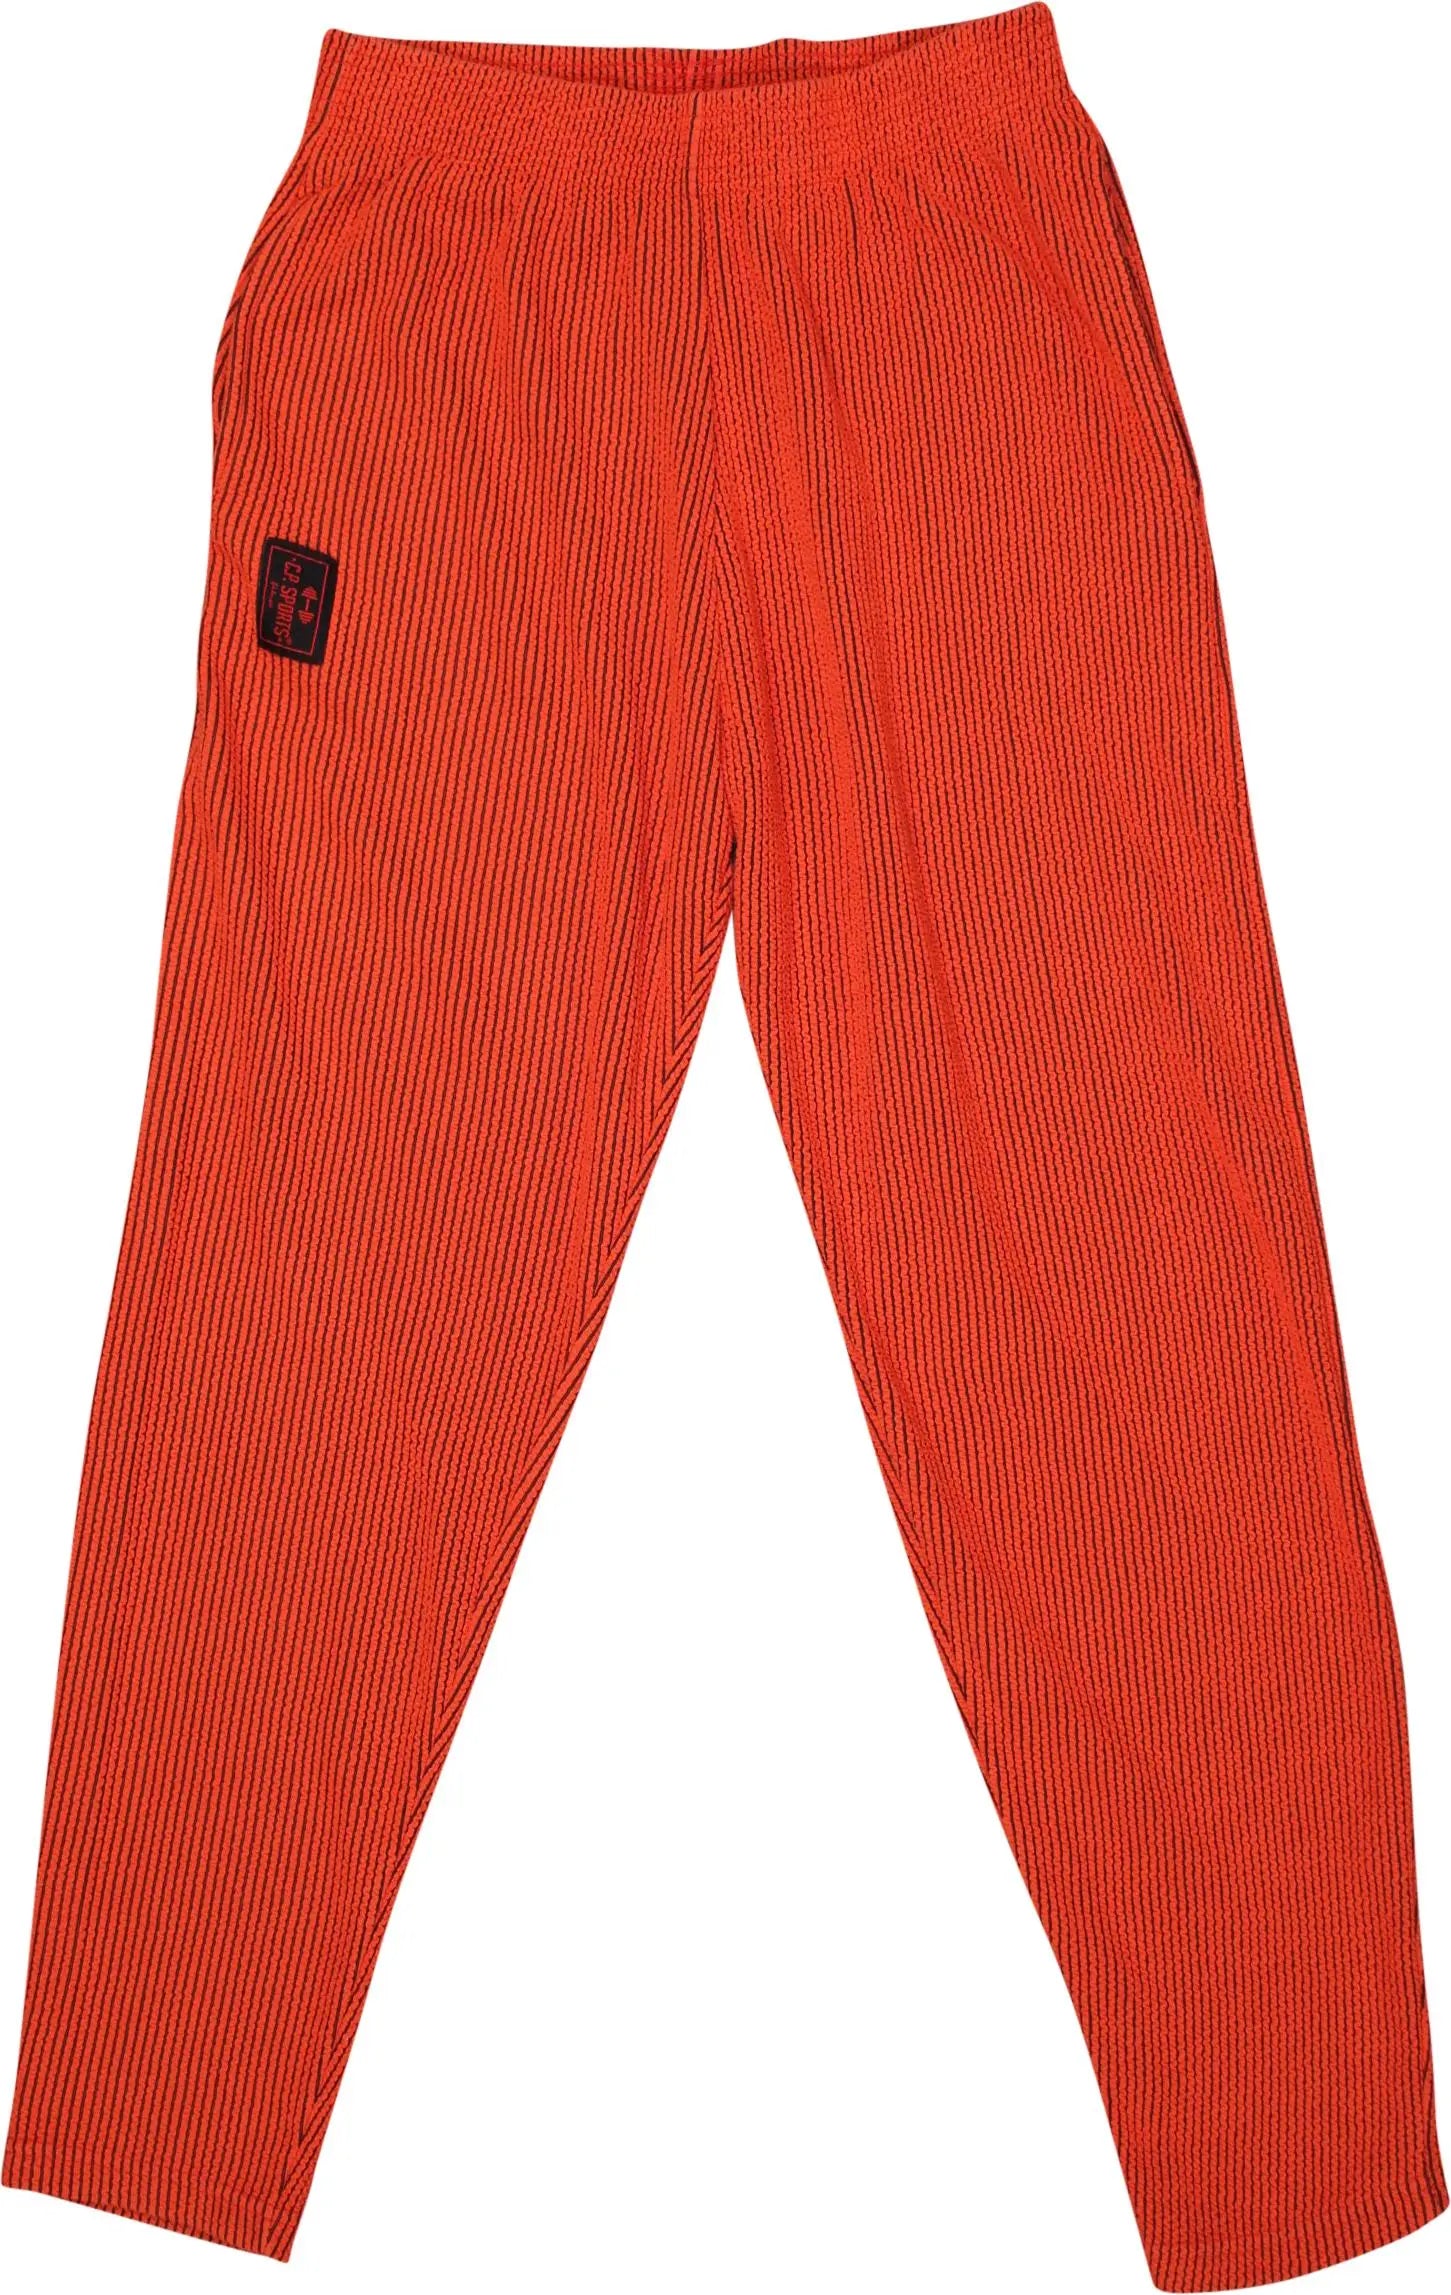 C.P. Sports - Orange Joggers- ThriftTale.com - Vintage and second handclothing